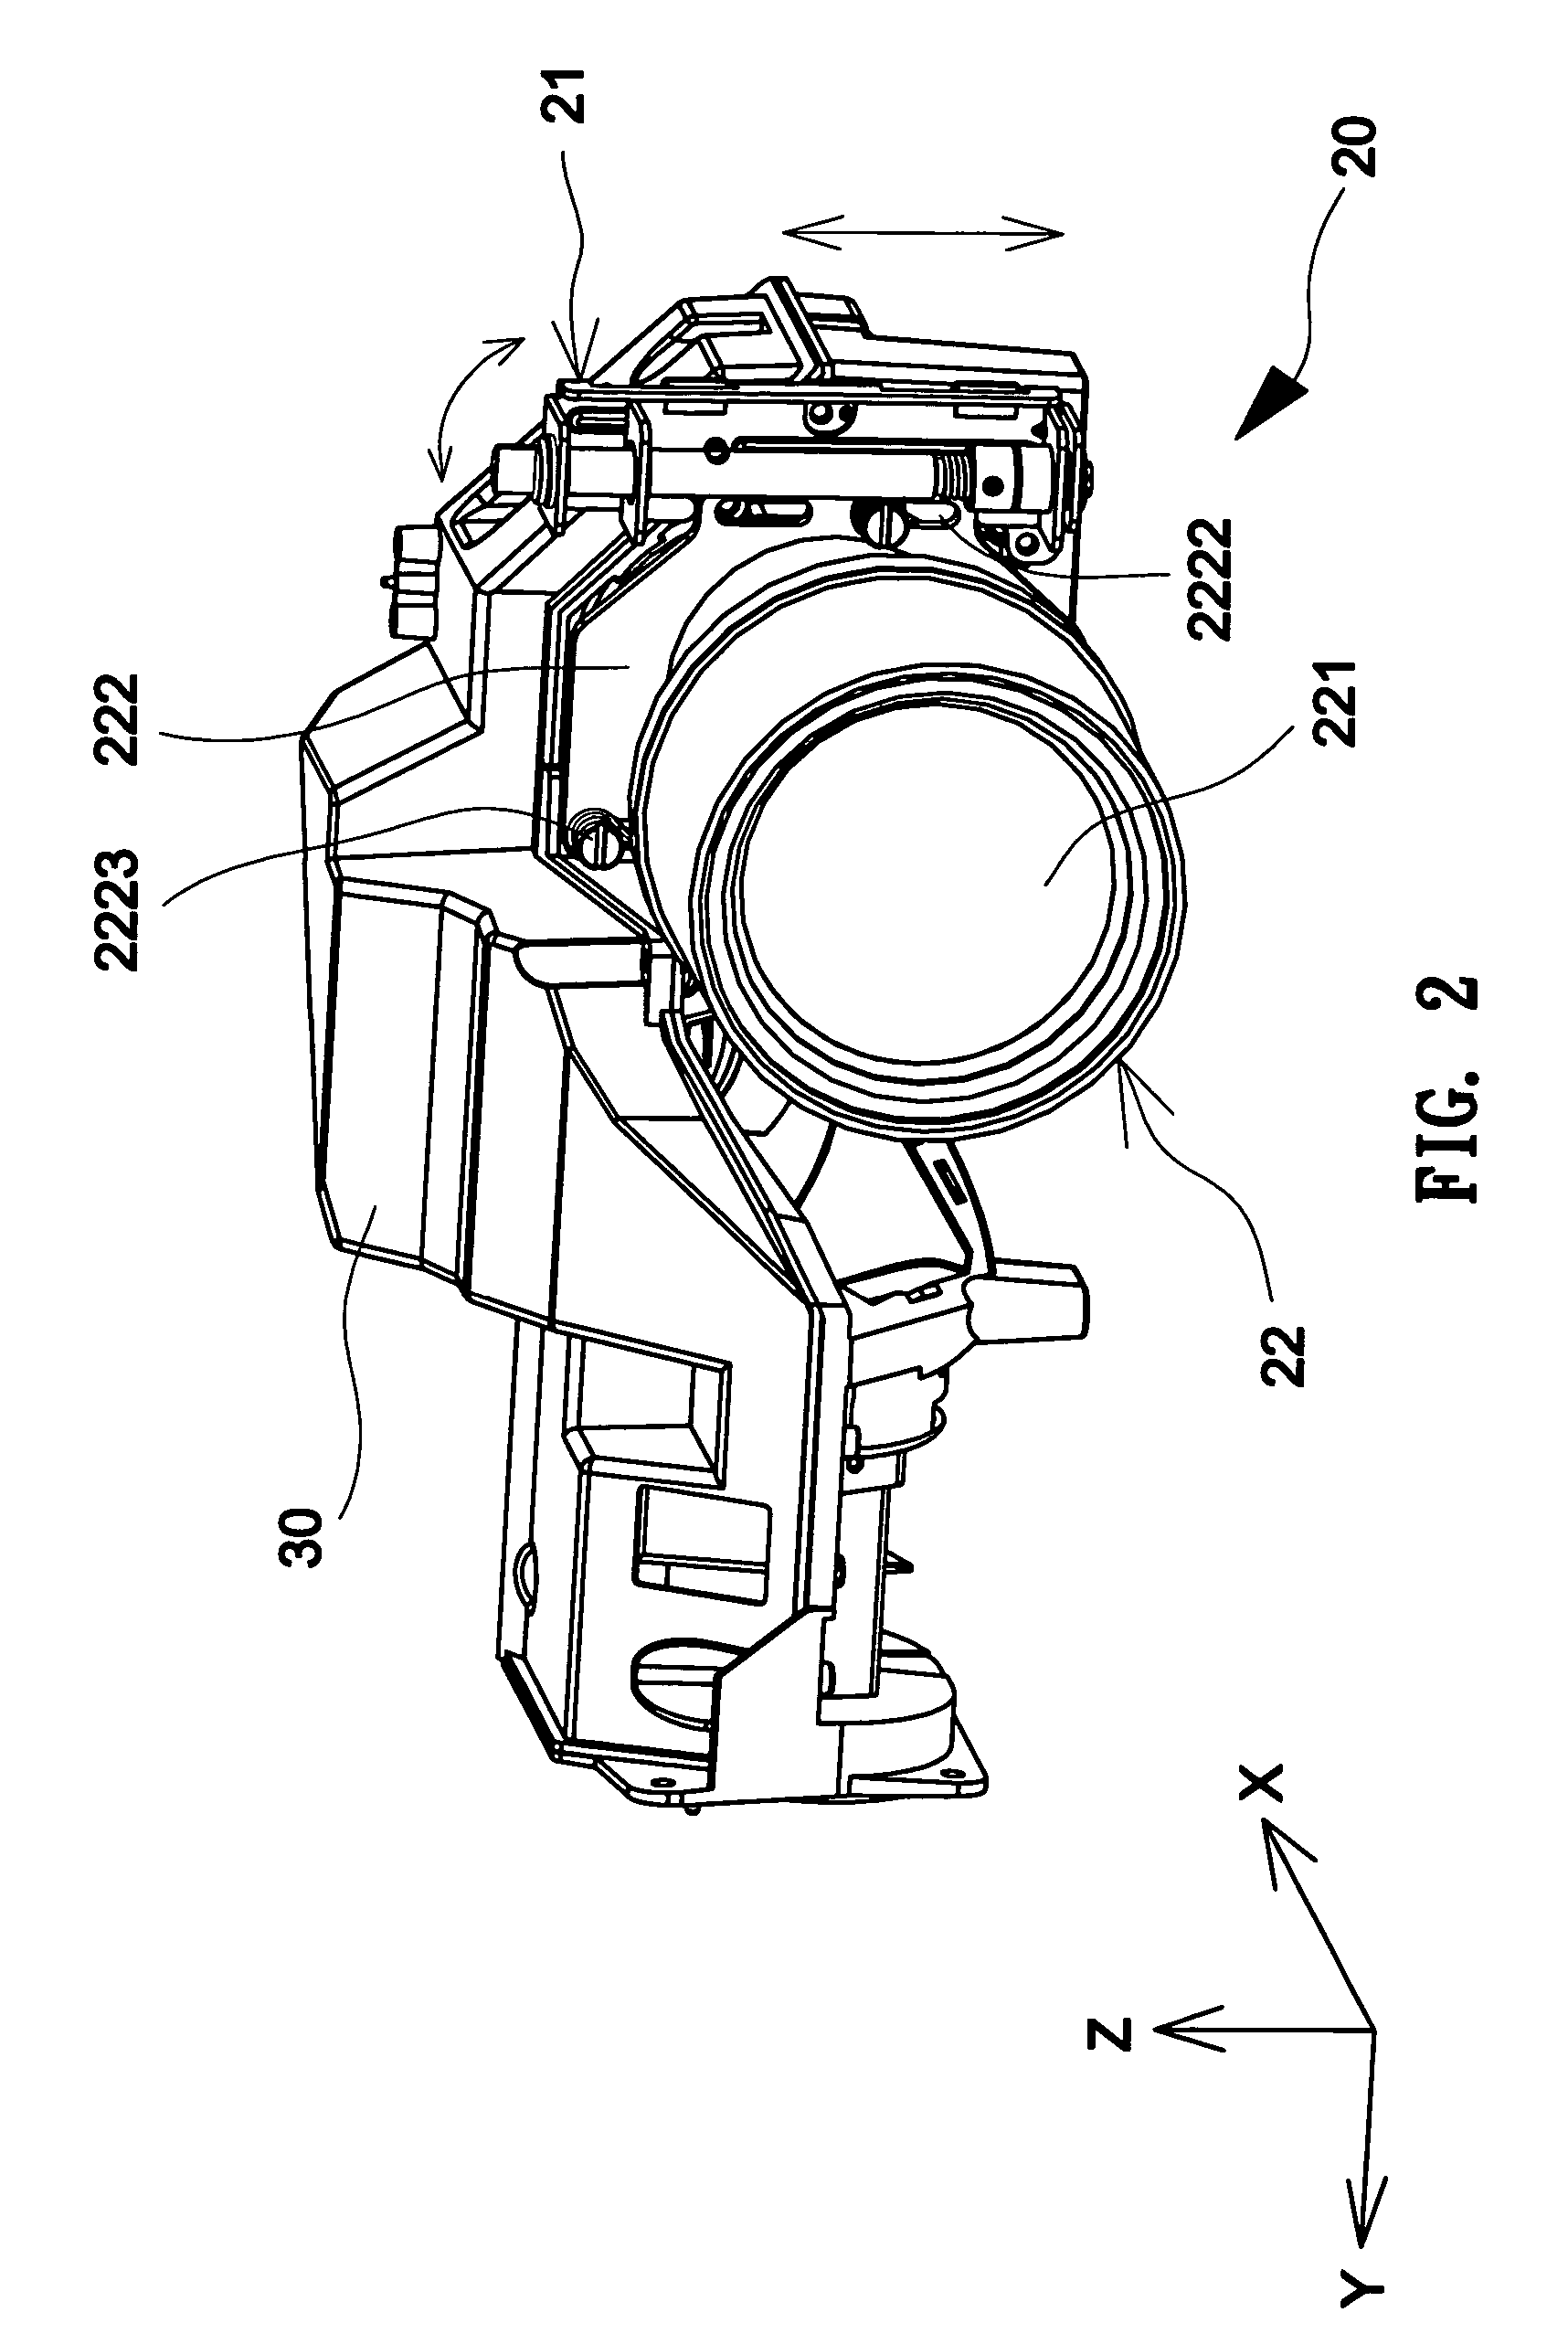 Projection lens movement-adjusting apparatus